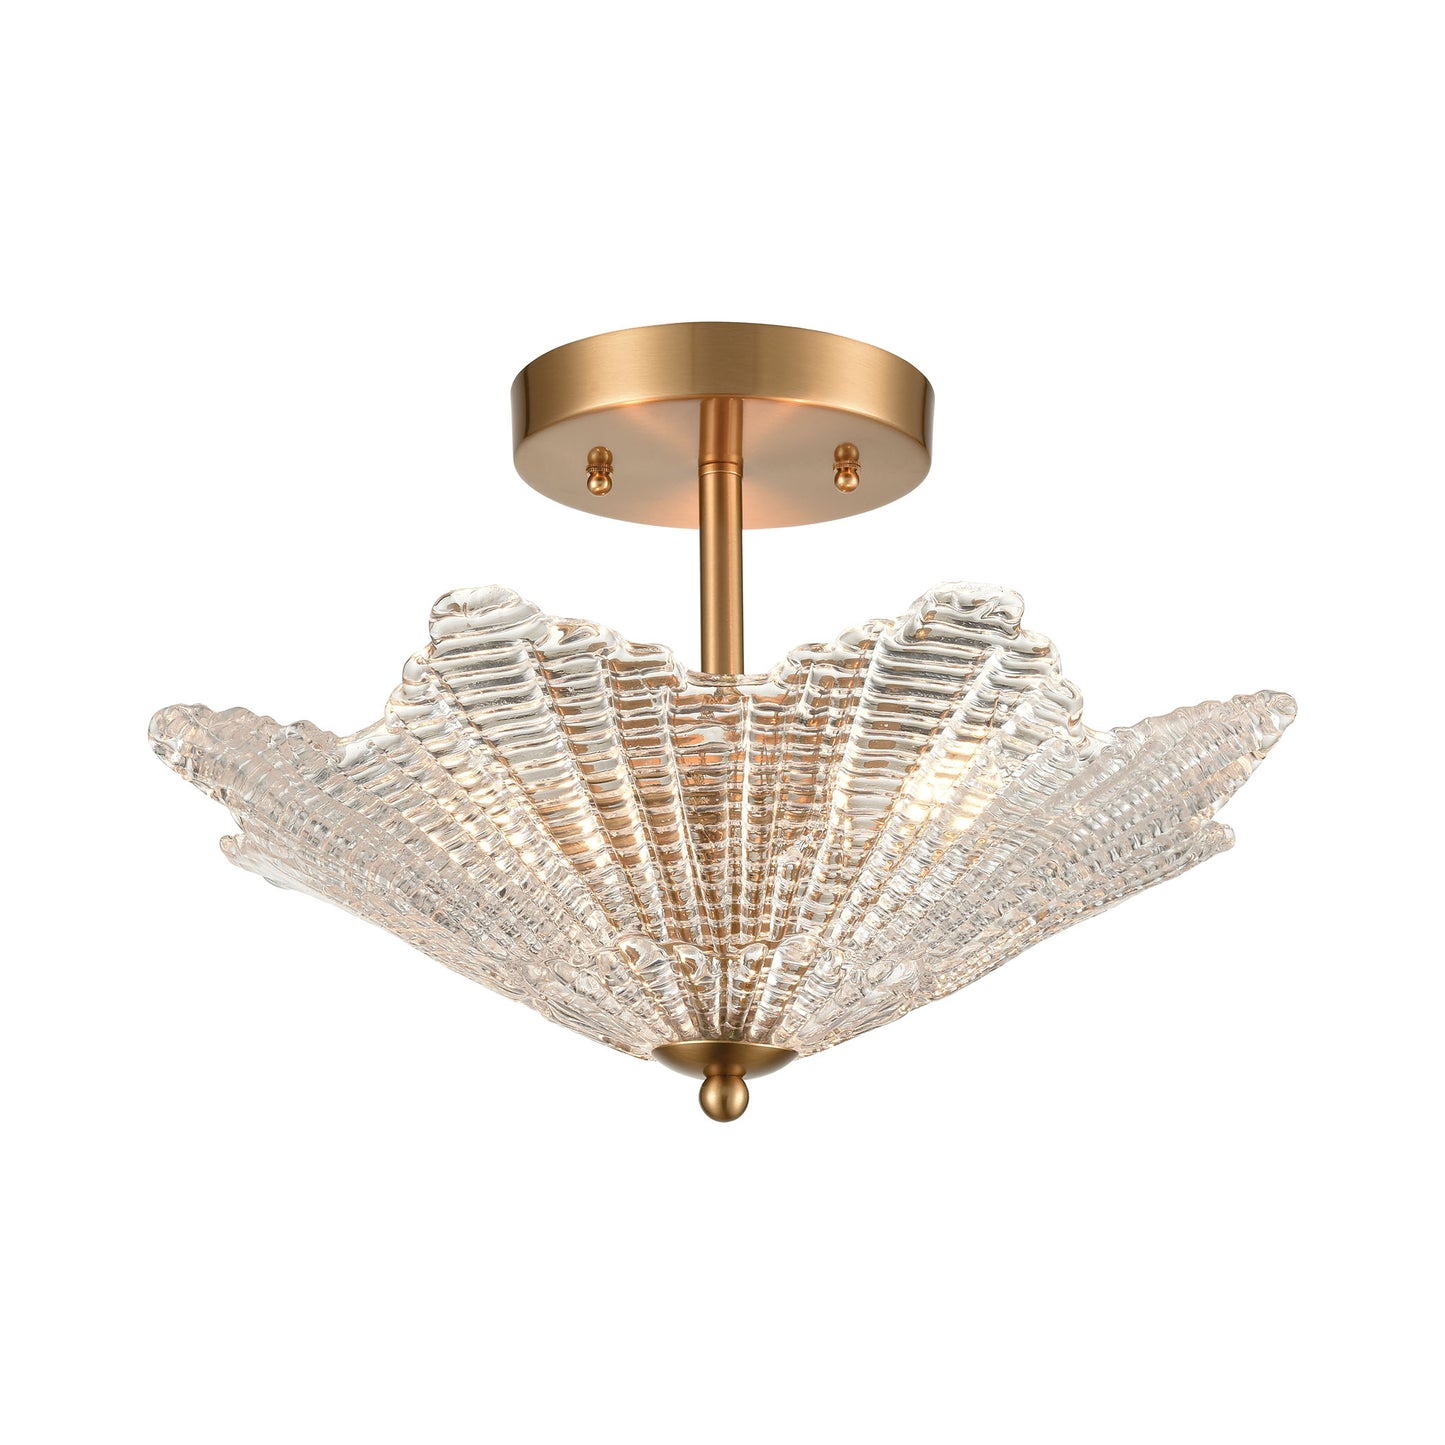 ELK Lighting 60164/3 - Radiance 16" Wide 3-Light Semi Flush in Satin Brass with Clear Textured Glass